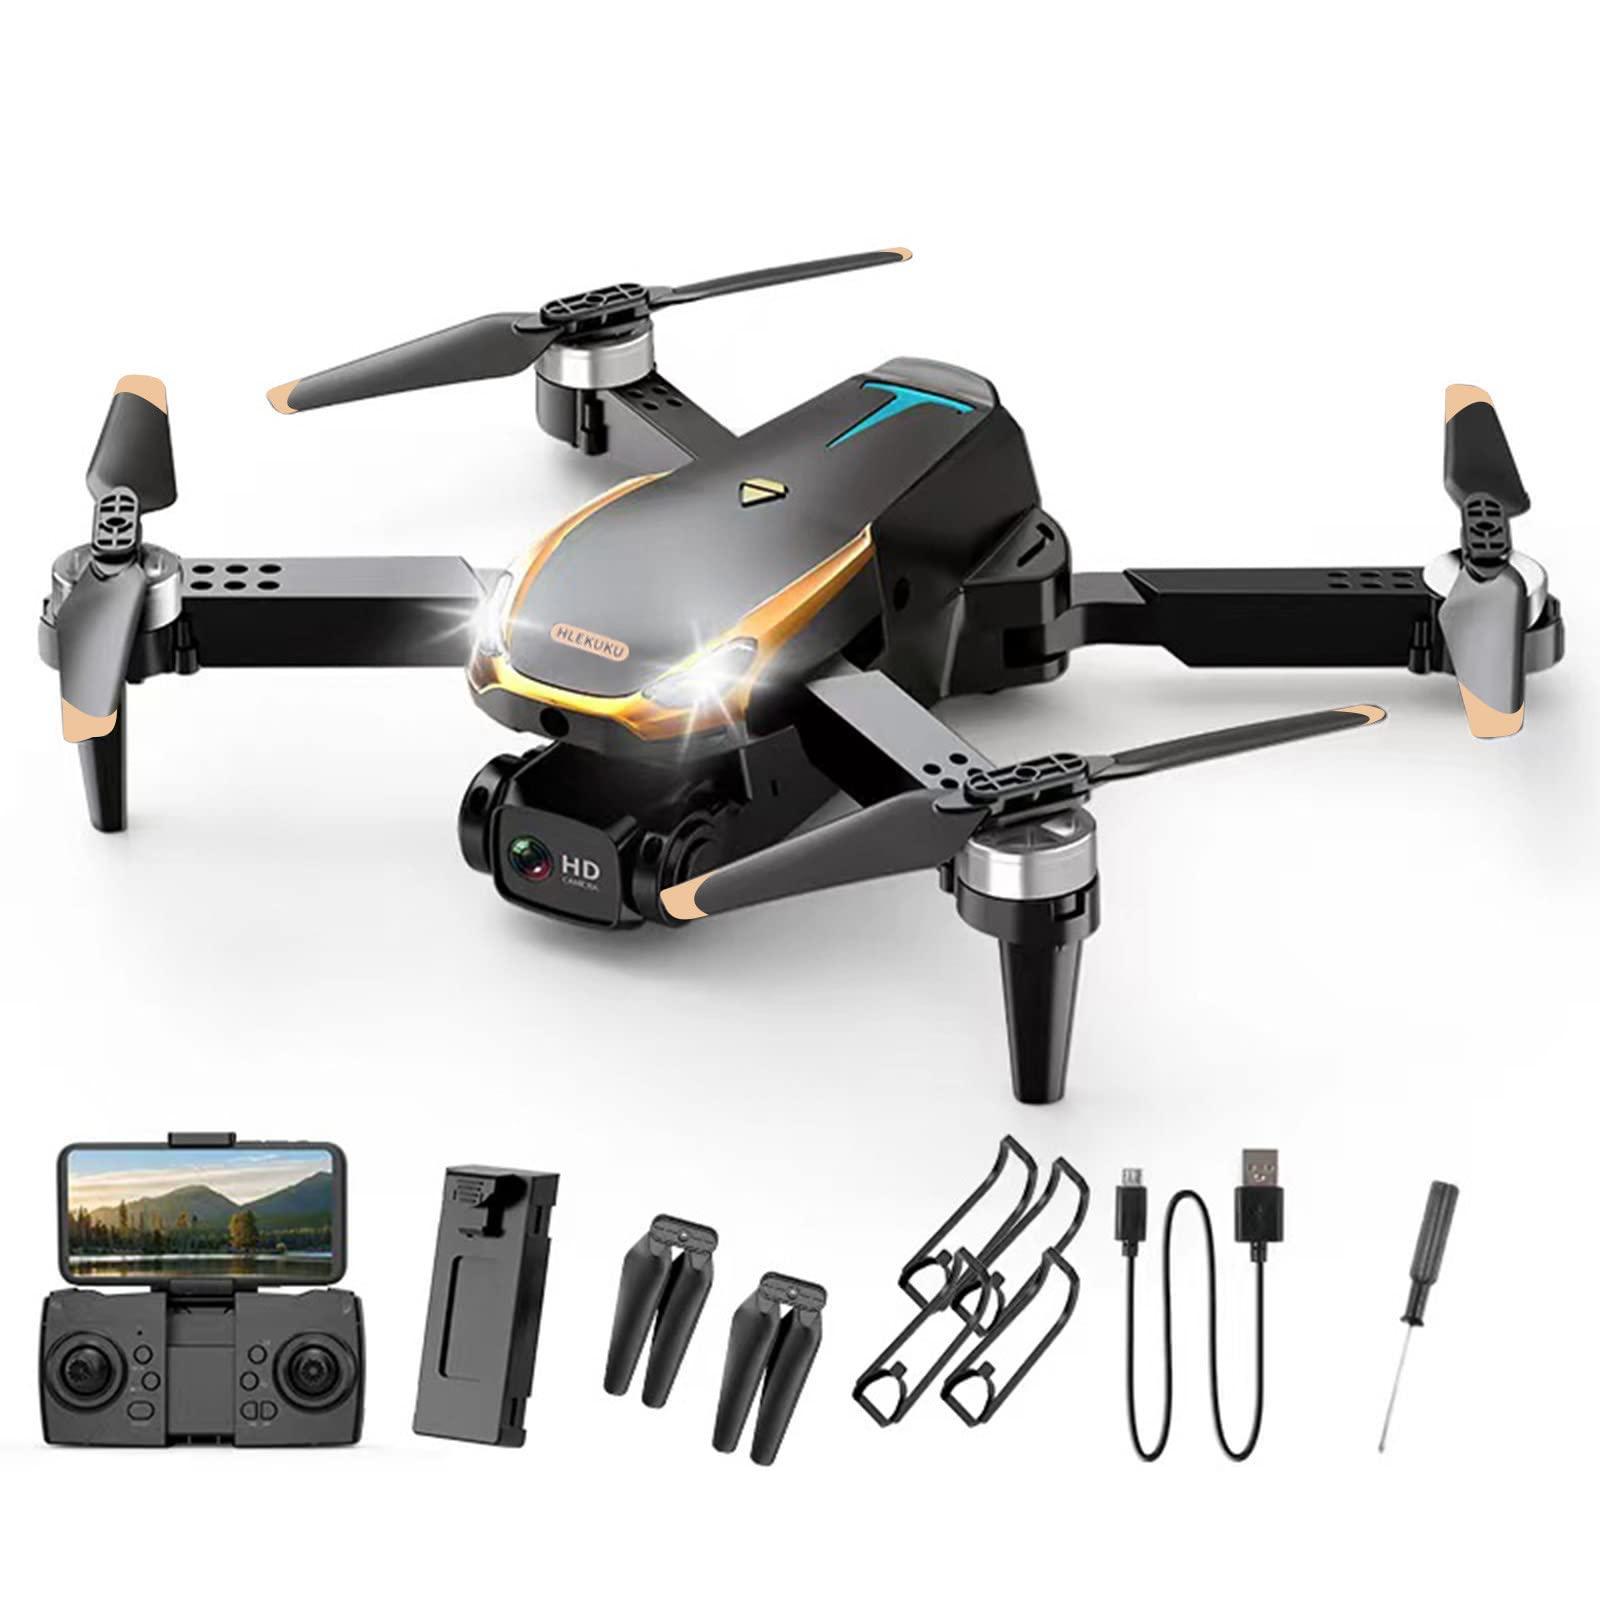 Remote Control Gadgets For Adults: Top Remote Control Drones for Adult Photography and Adventure